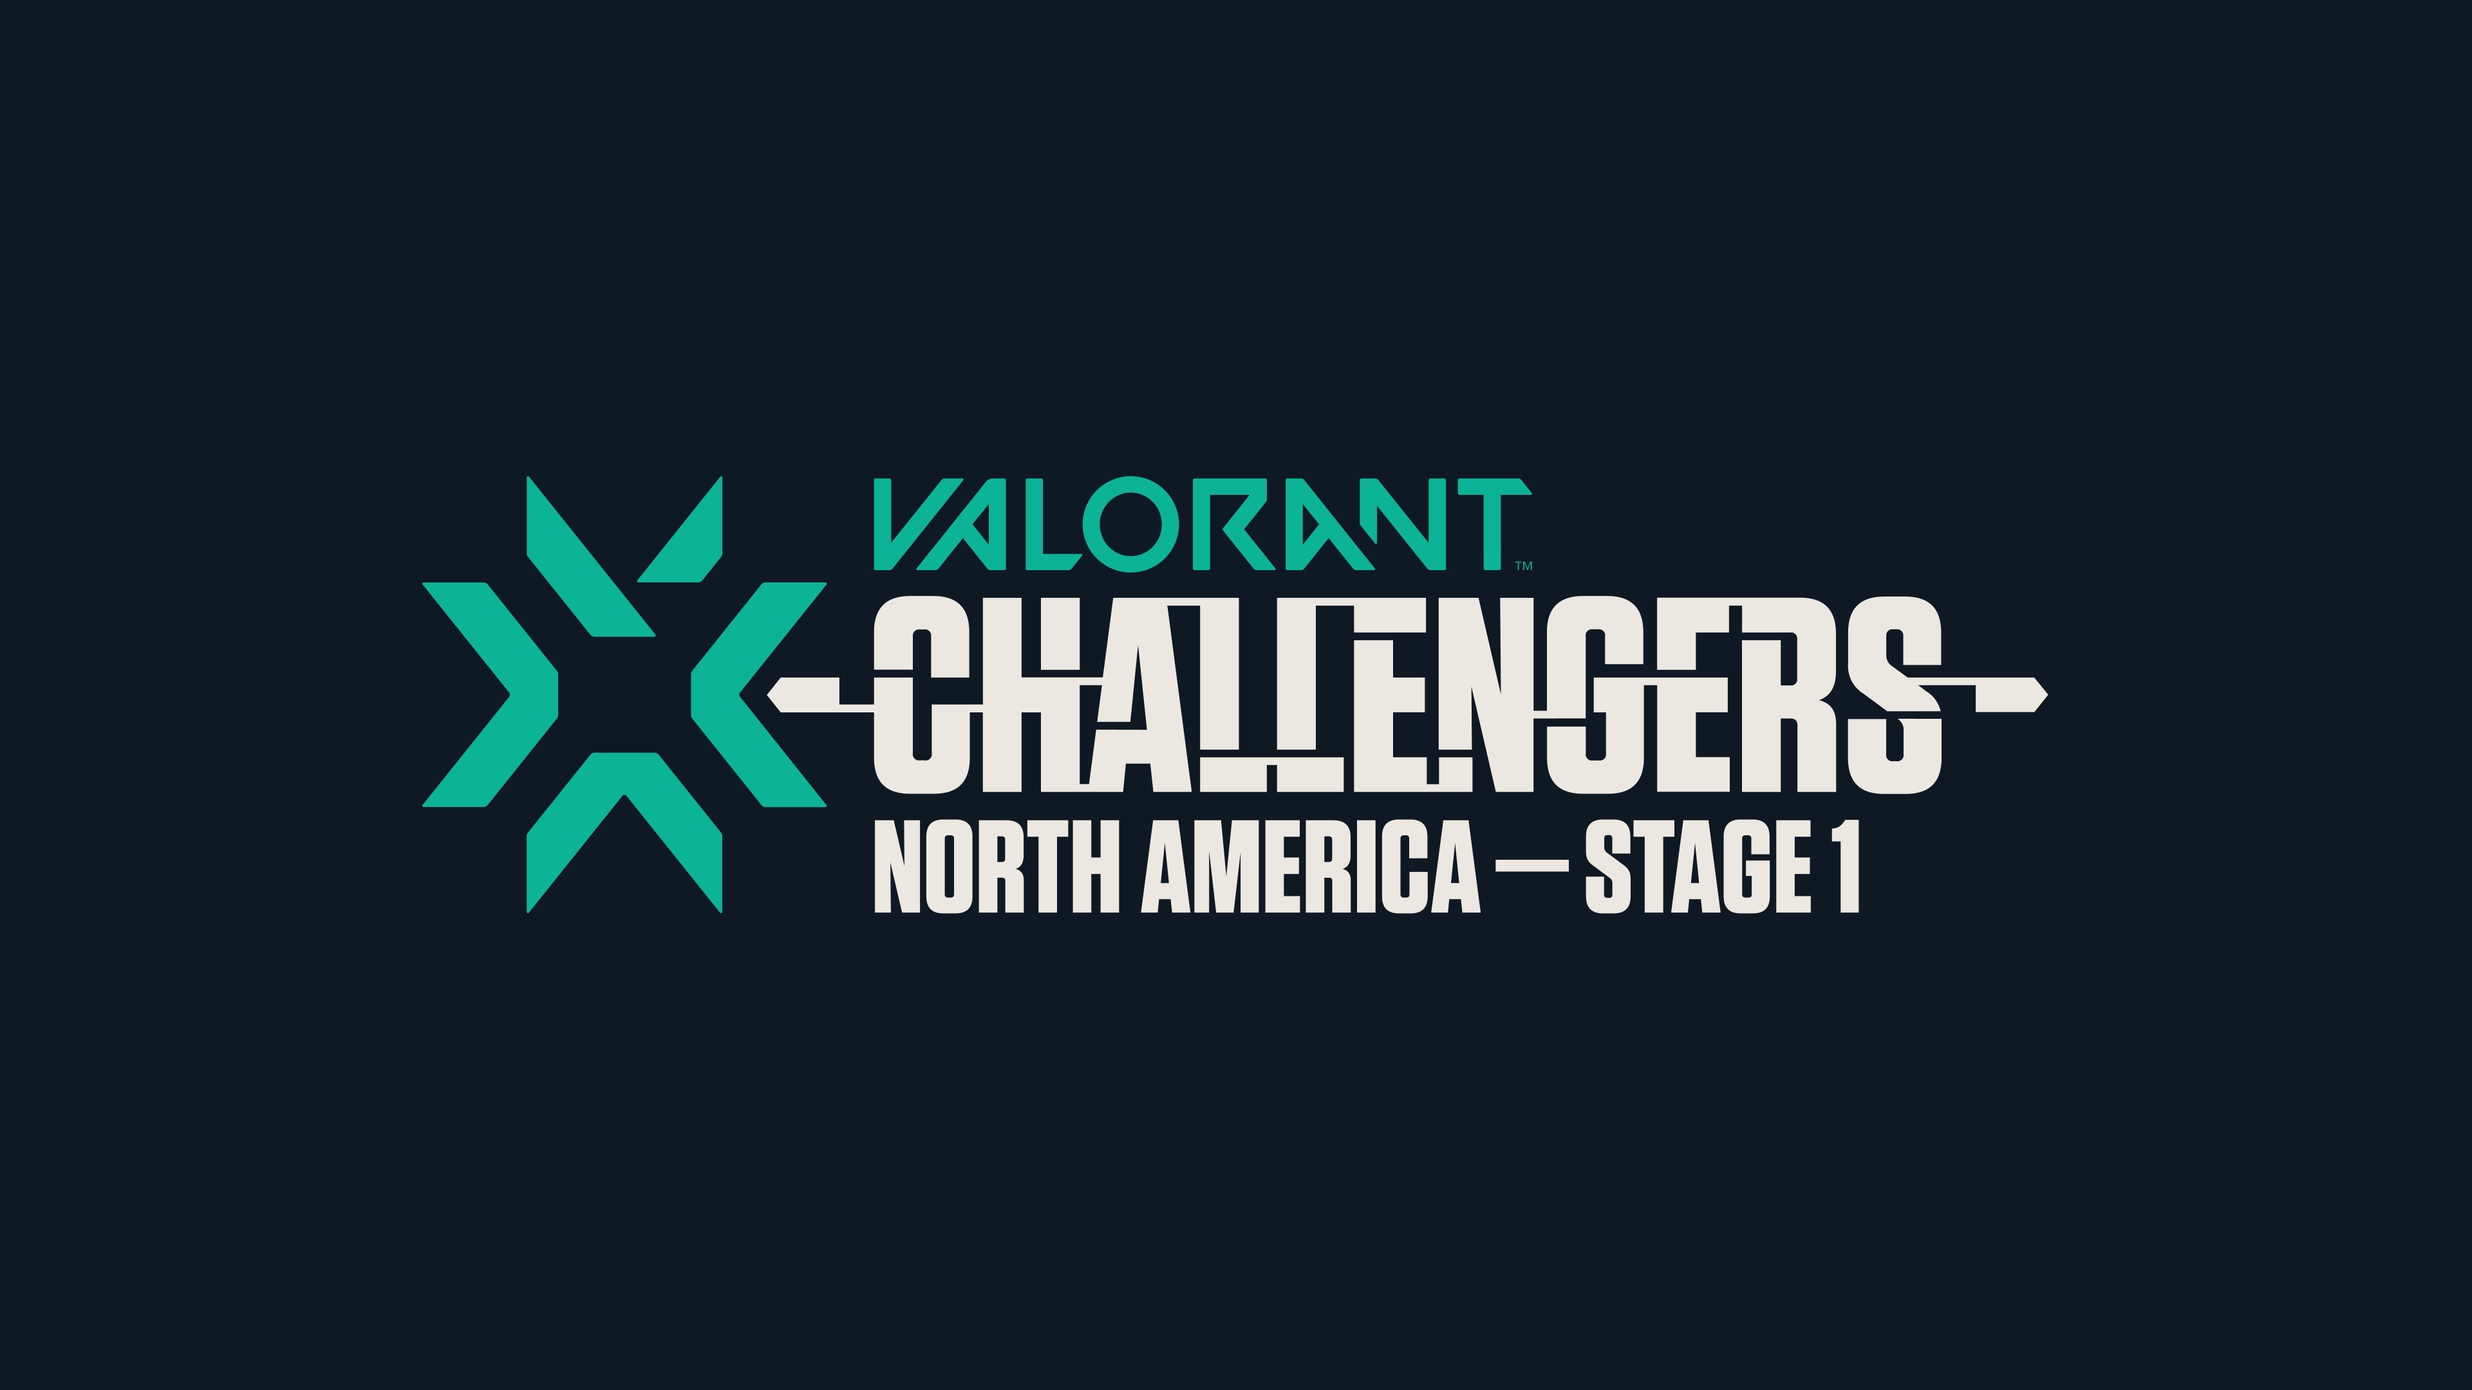 Prime Gaming is now a partner of the EMEA Valorant Champions Tour